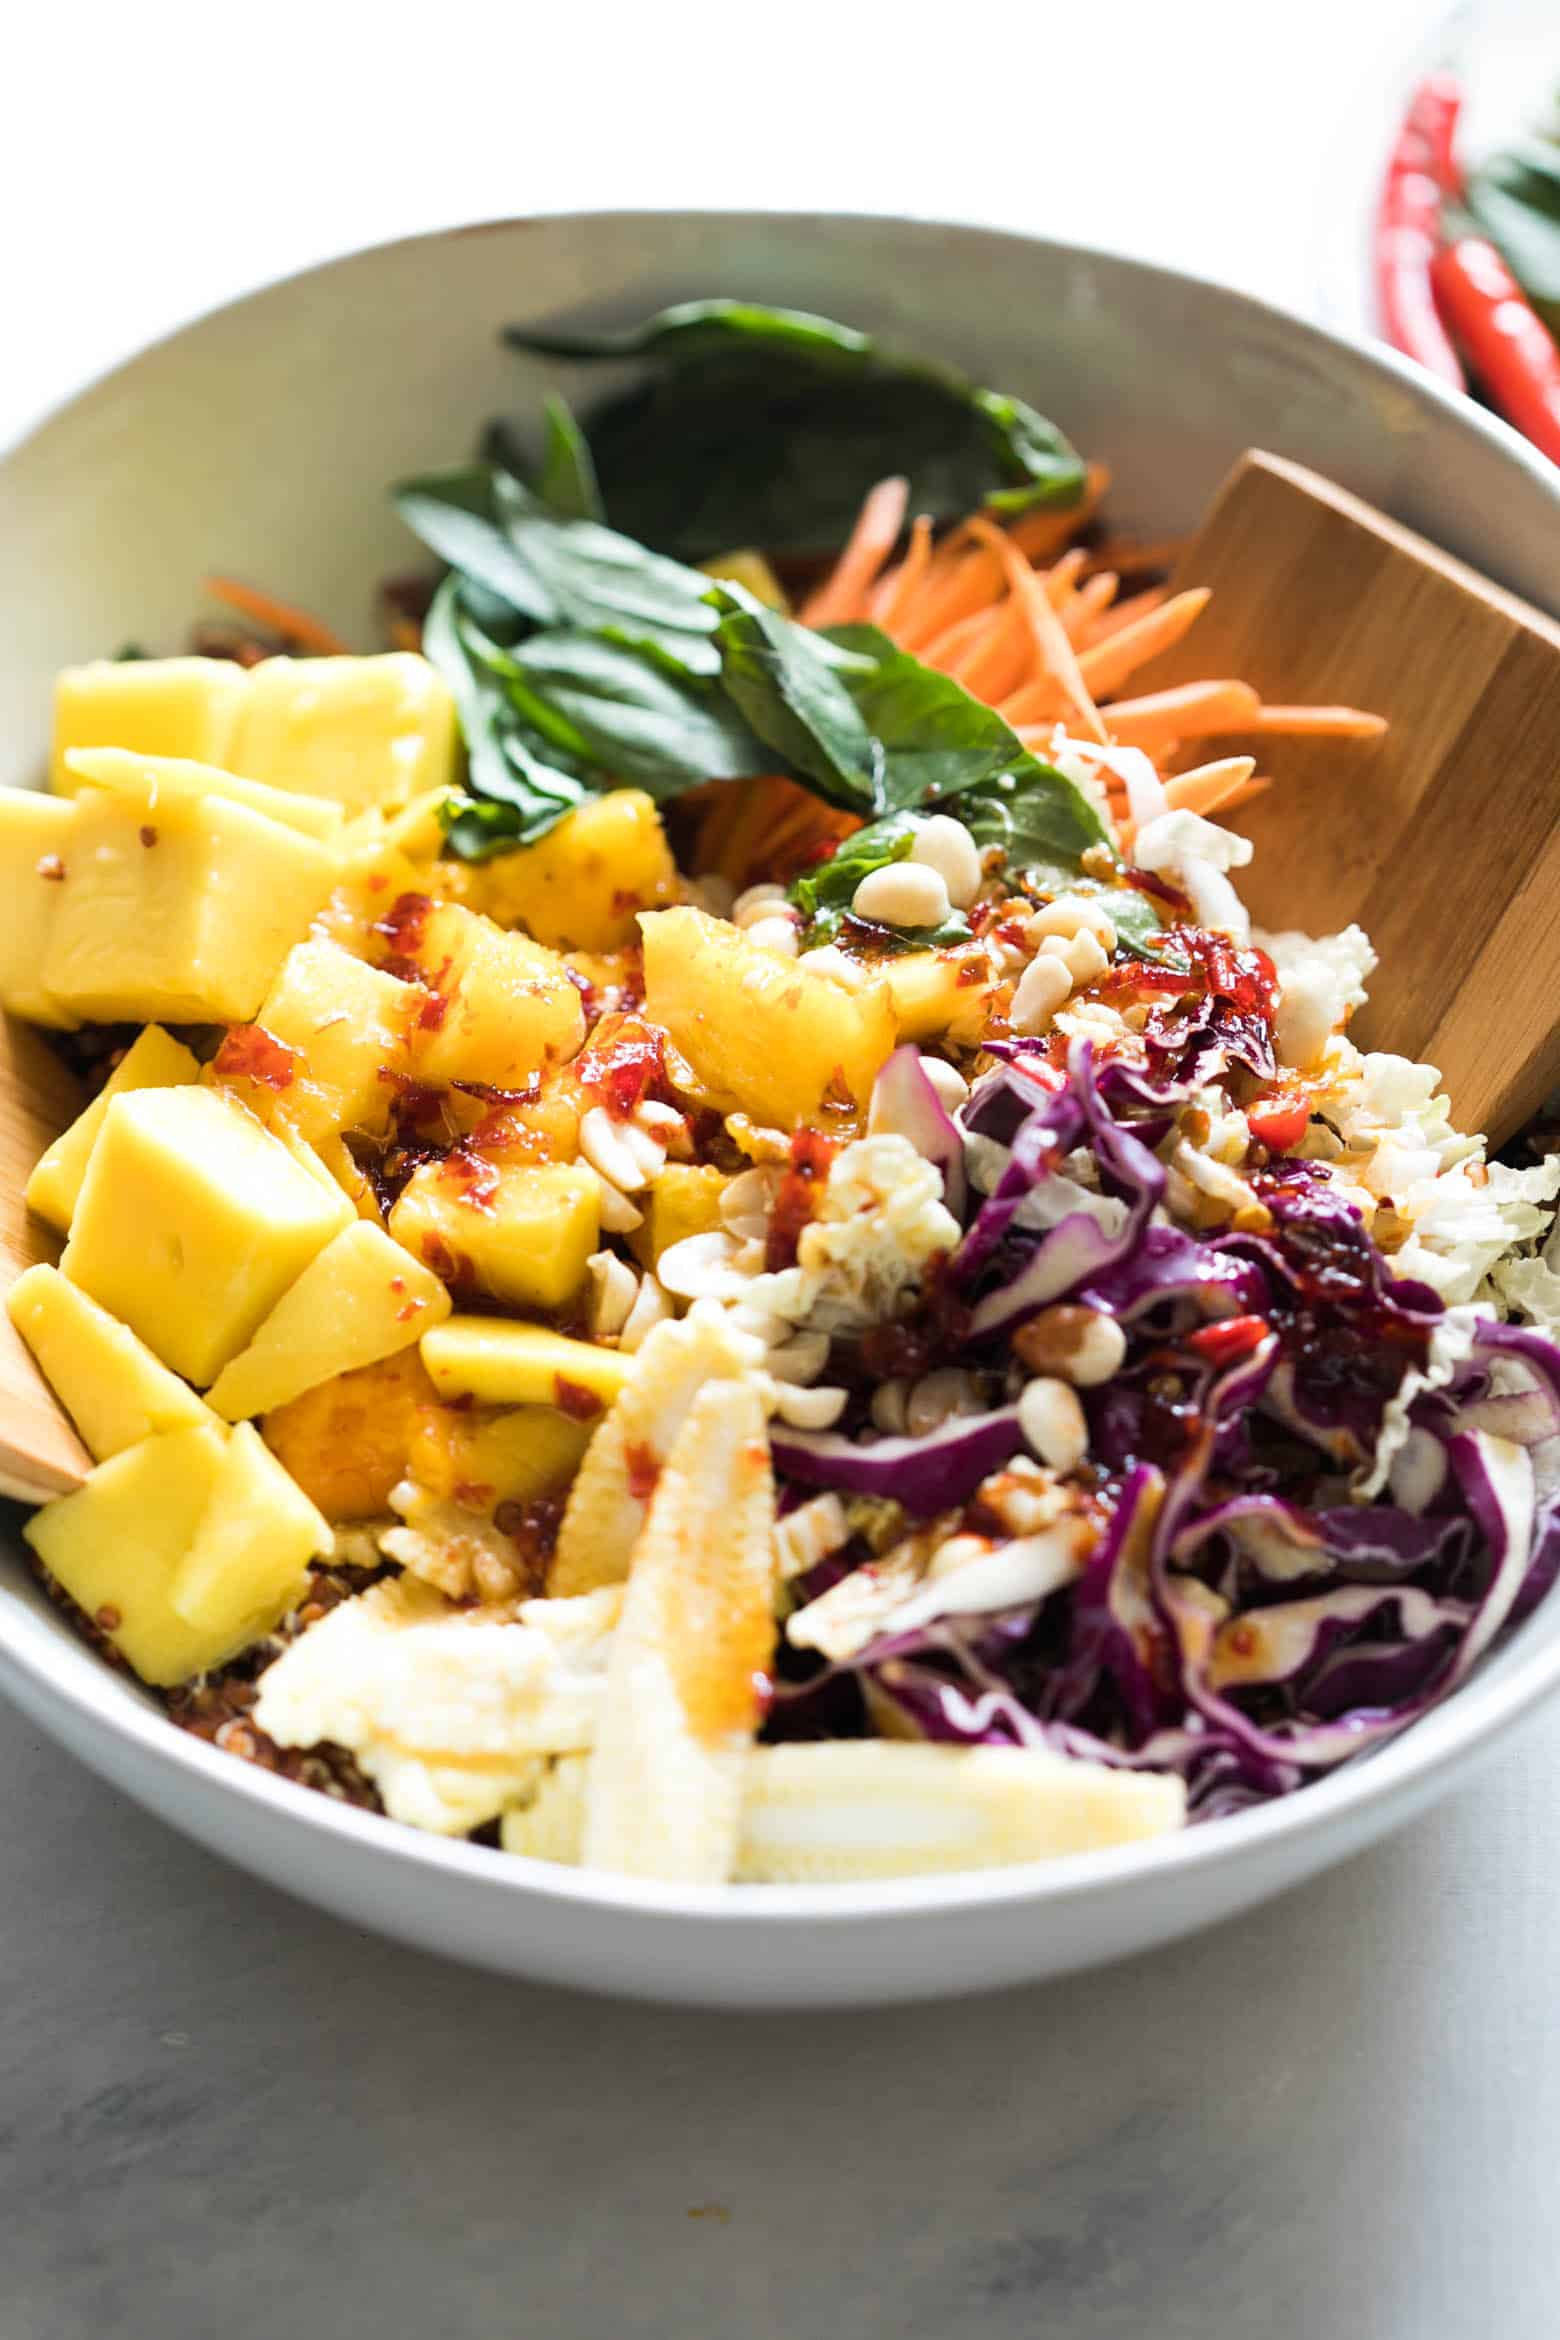 Super delicious Thai Peanut Mango Quinoa Salad which you can make ahead for potlucks and barbecues and also happens to be gluten free and vegan! Comes with a finger licking sweet and spicy sambal dressing that's different from the regular peanut dressing.